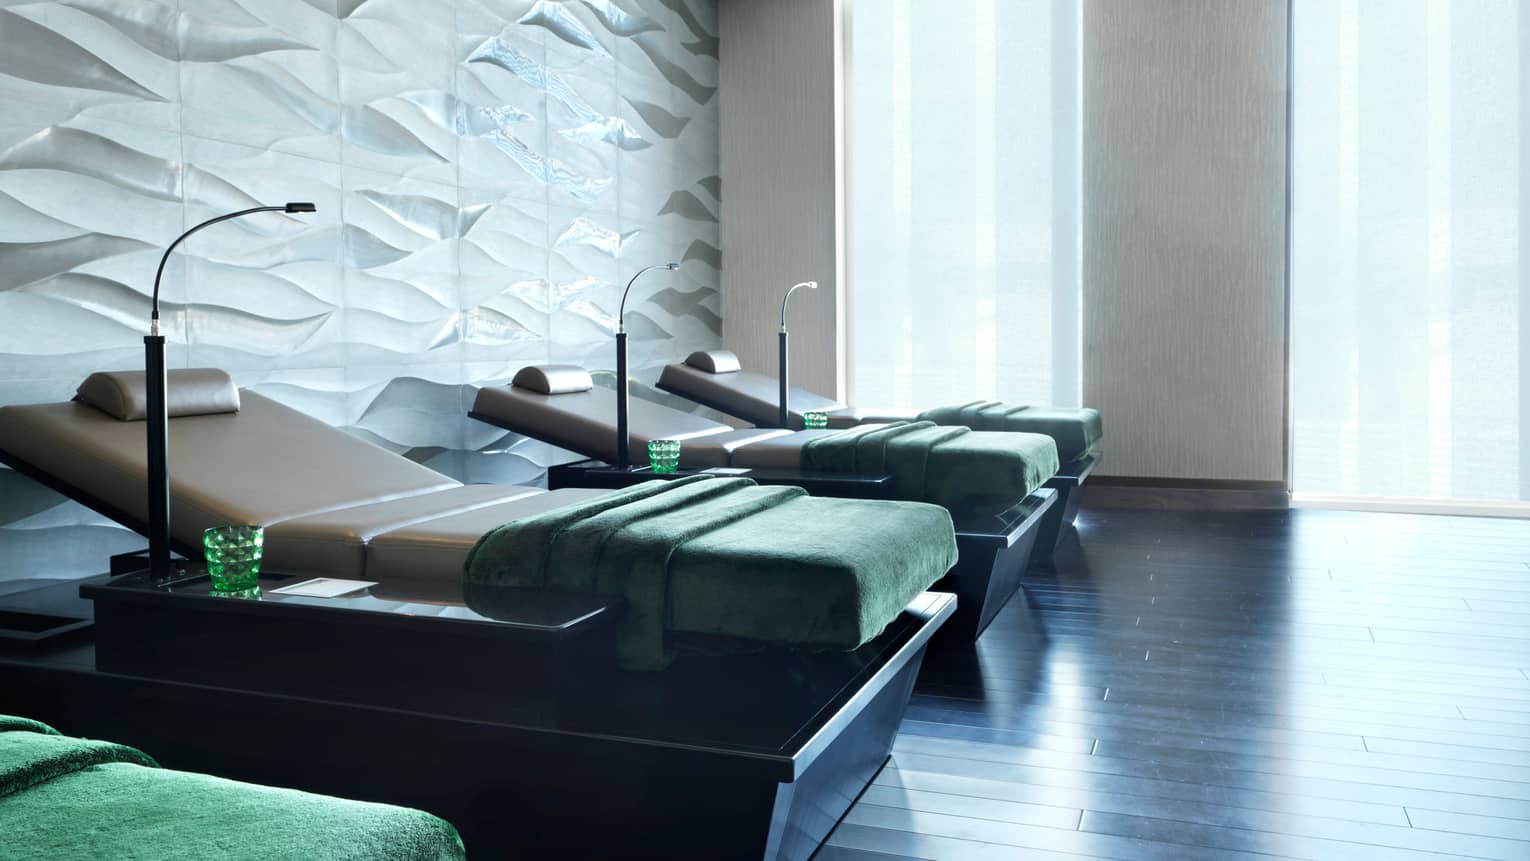 Four spa beds side-by-side with reading lamps, green blankets and glasses, in front of white wall and sunny windows